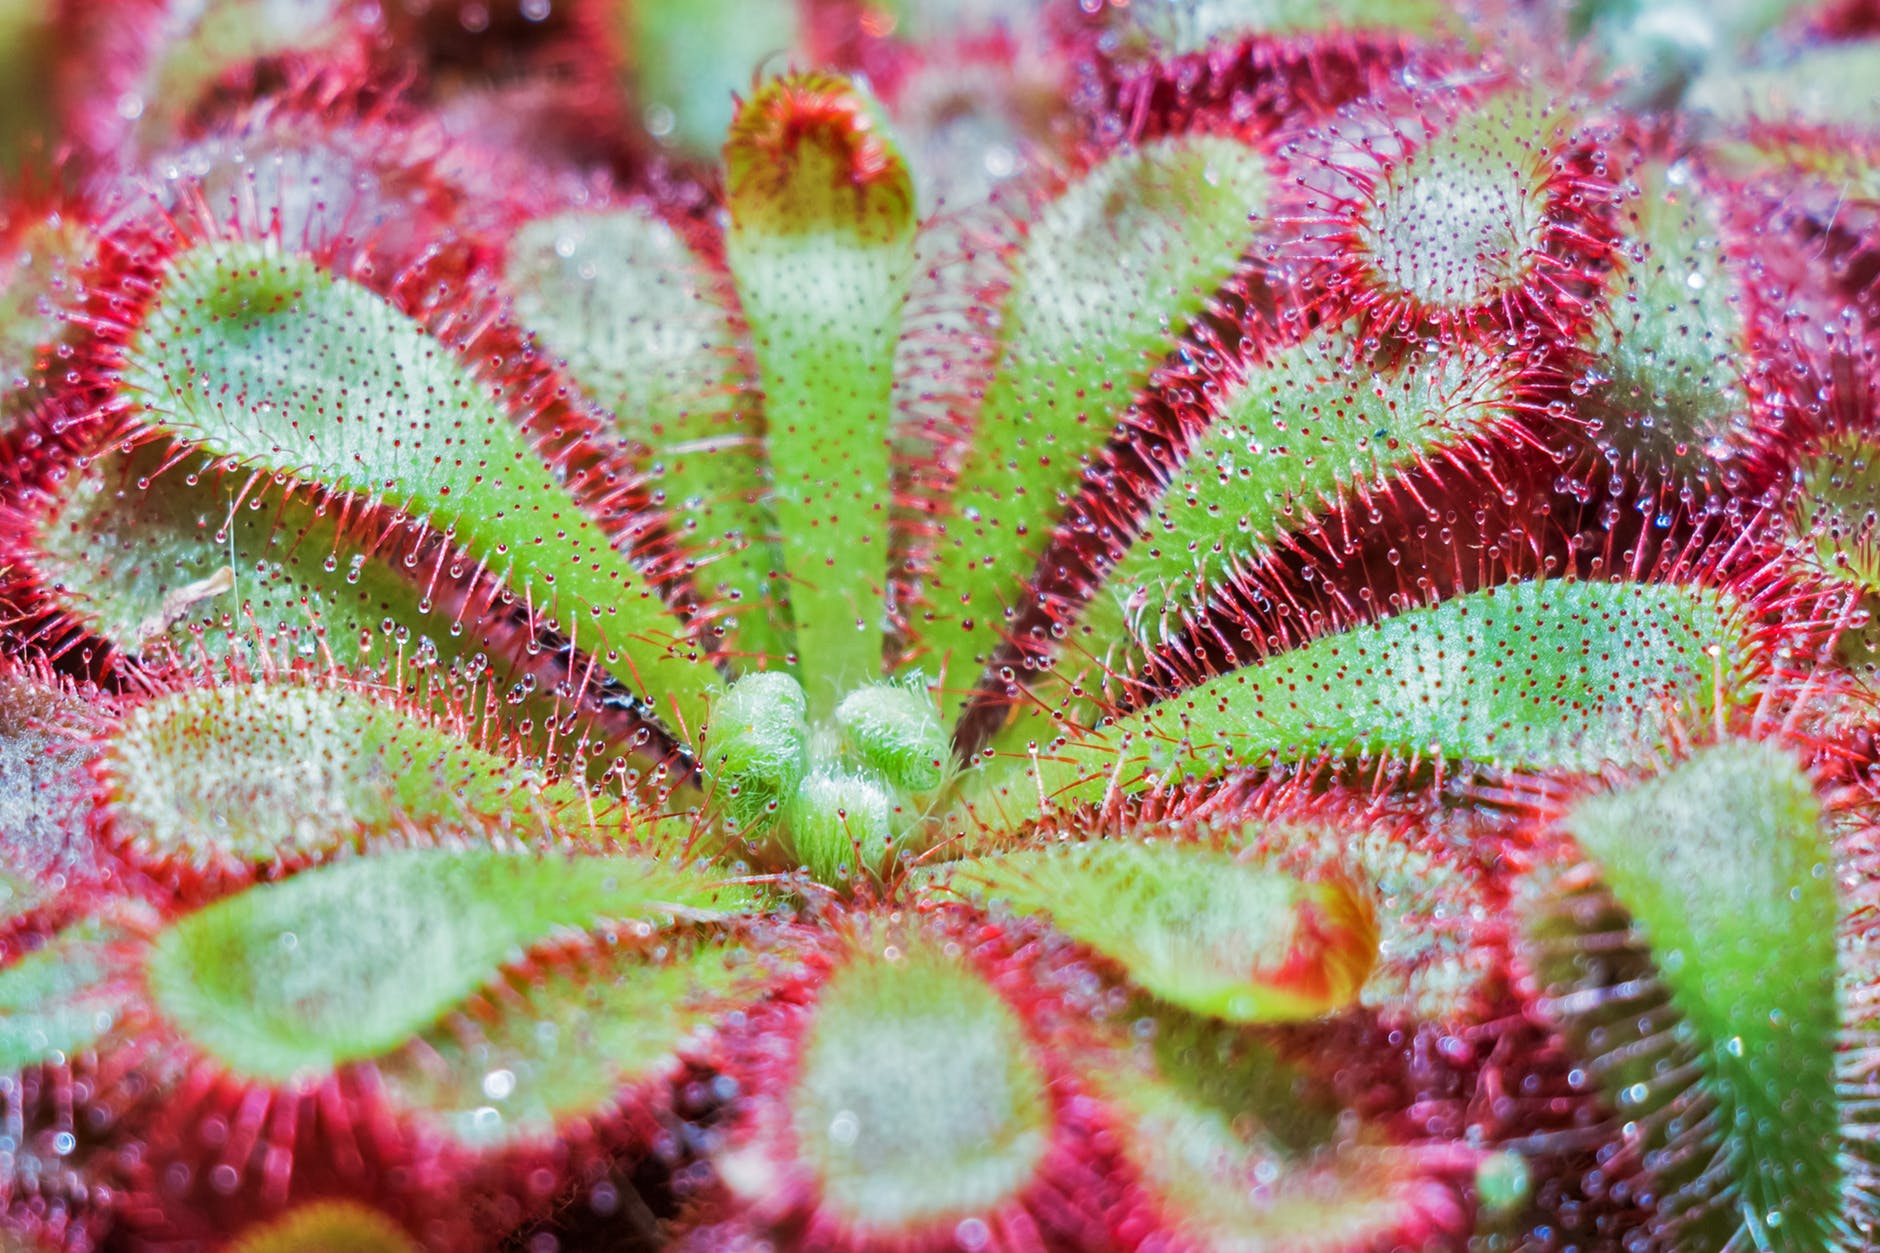 How to choose the substrate for carnivorous plants?